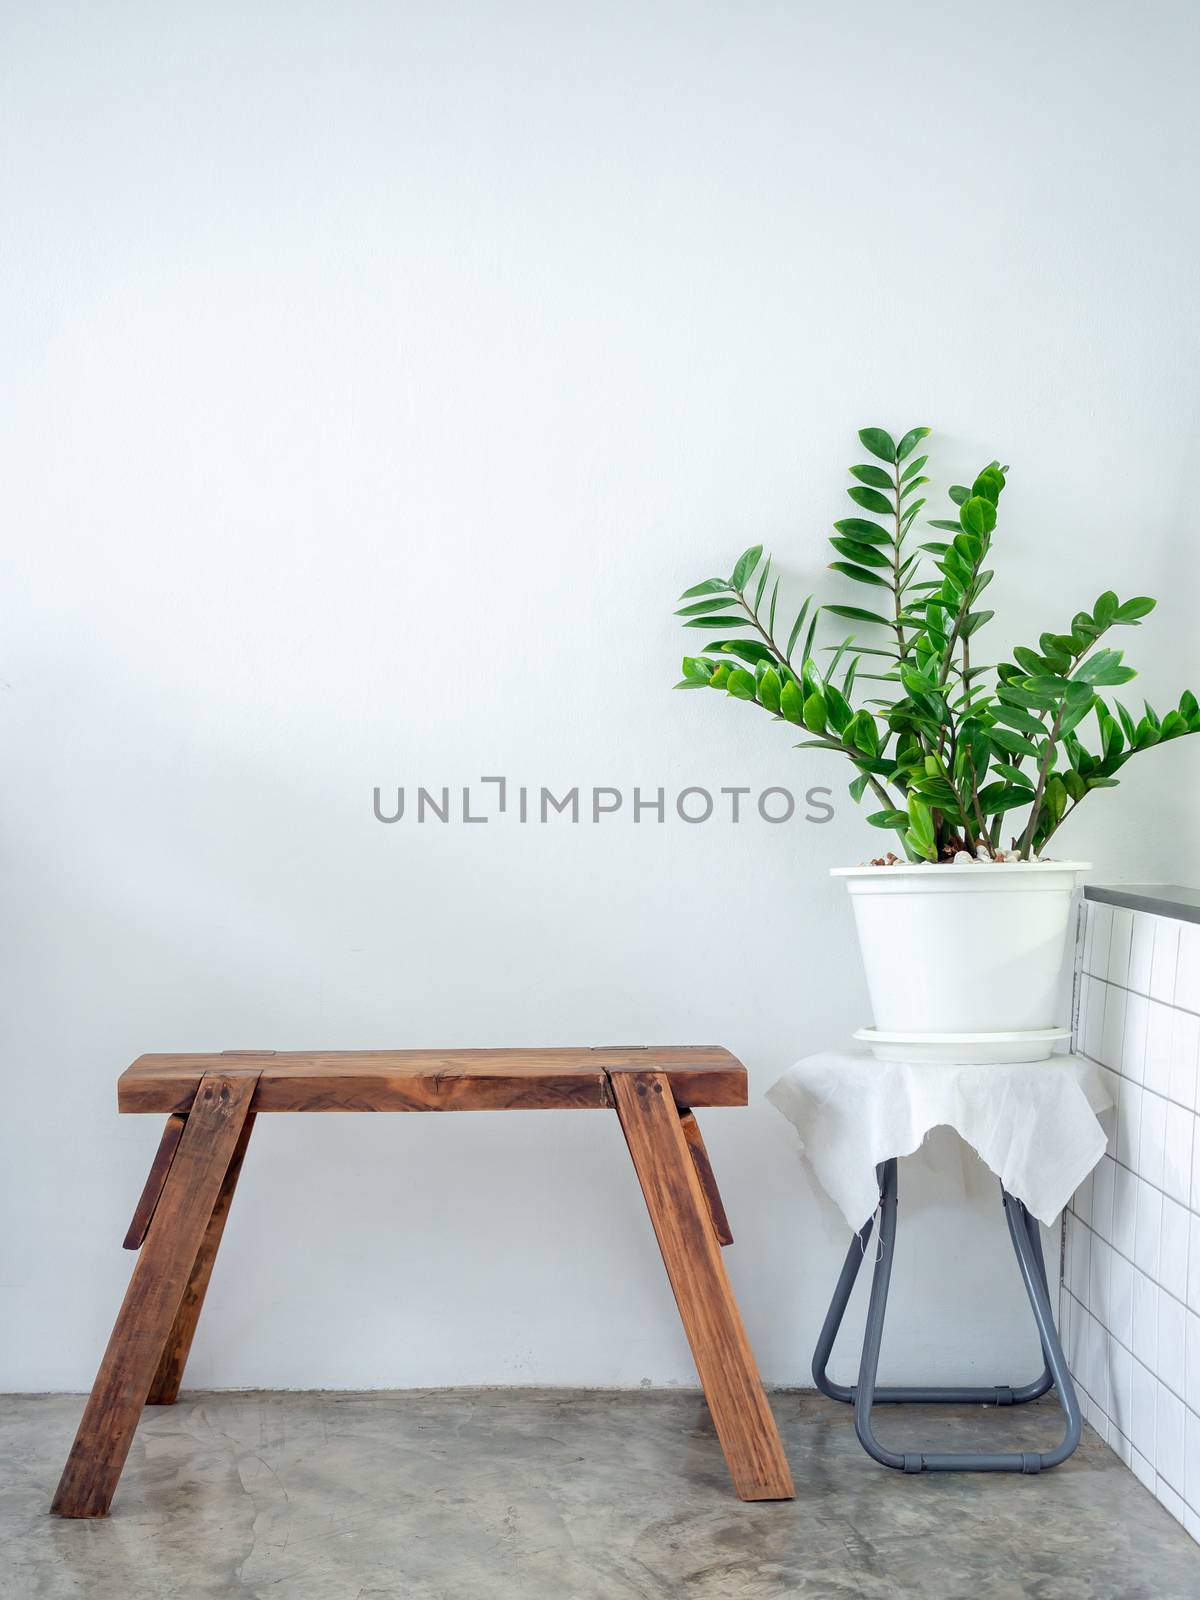 White cafe decoration minimal style. Green leaves in white pot and wooden bench on white wall background vertical style.